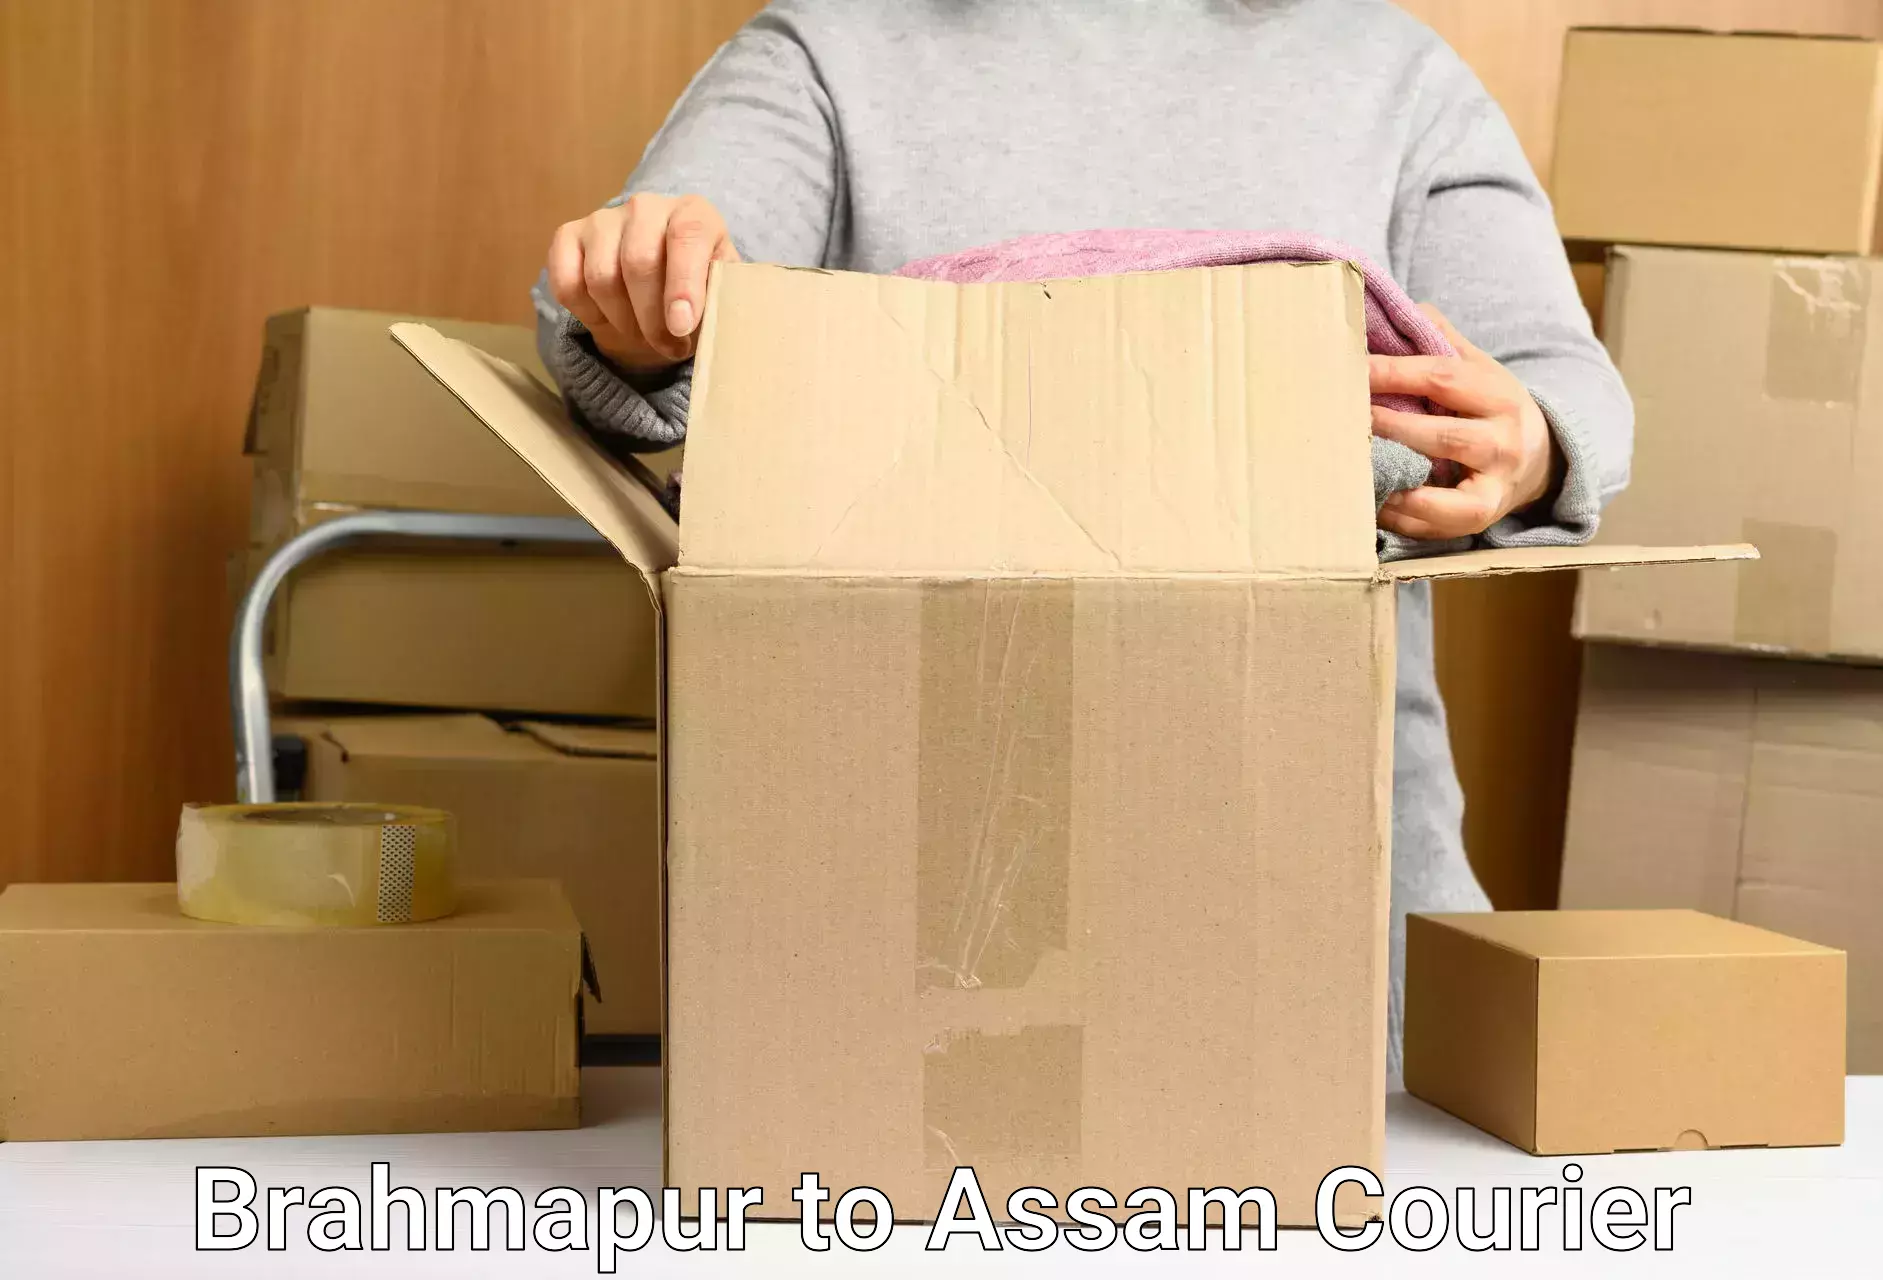 Reliable package handling in Brahmapur to Lala Assam